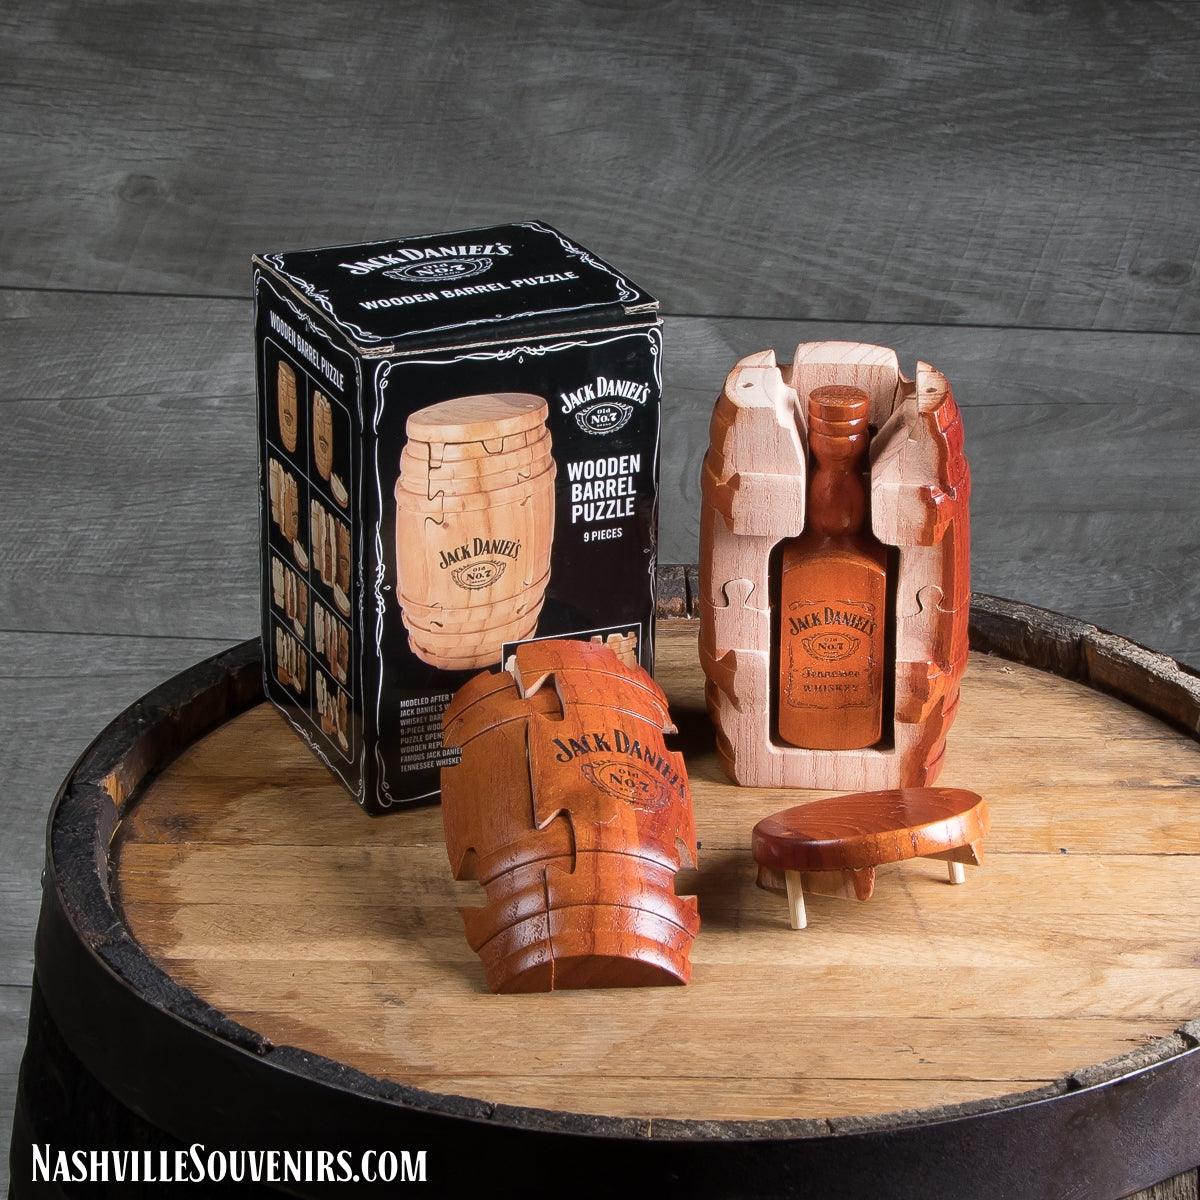 Officially licensed Jack Daniels Wooden Barrel Puzzle. FREE SHIPPING on all US orders over $75!